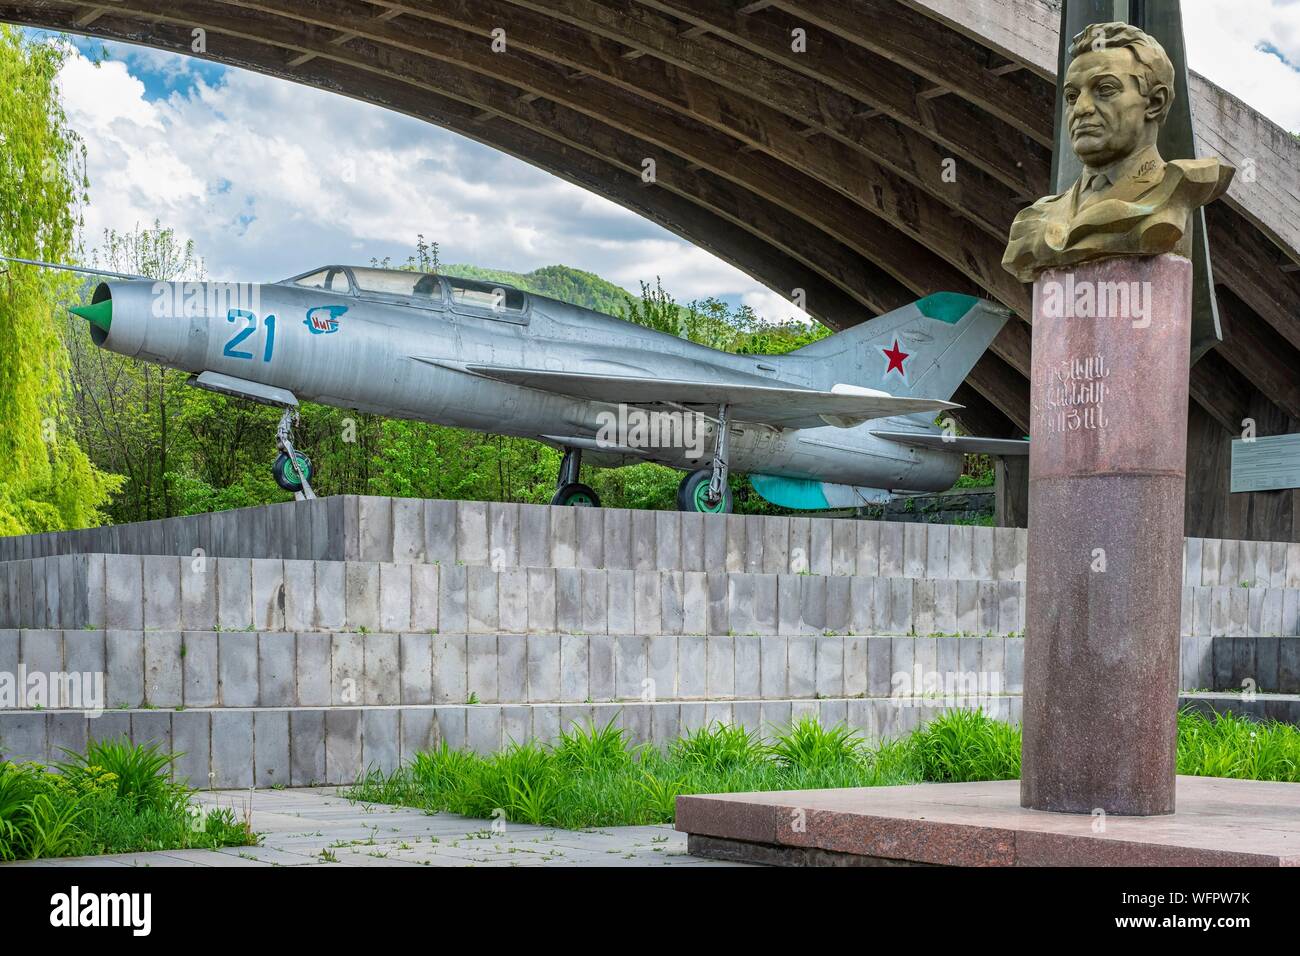 Armenia, Lorri region, Debed valley, surroundings of Alaverdi, Sanahin village, Mikoyan Brothers Museum, one of which was the designer of the famous MIG 21 fighter plane Stock Photo